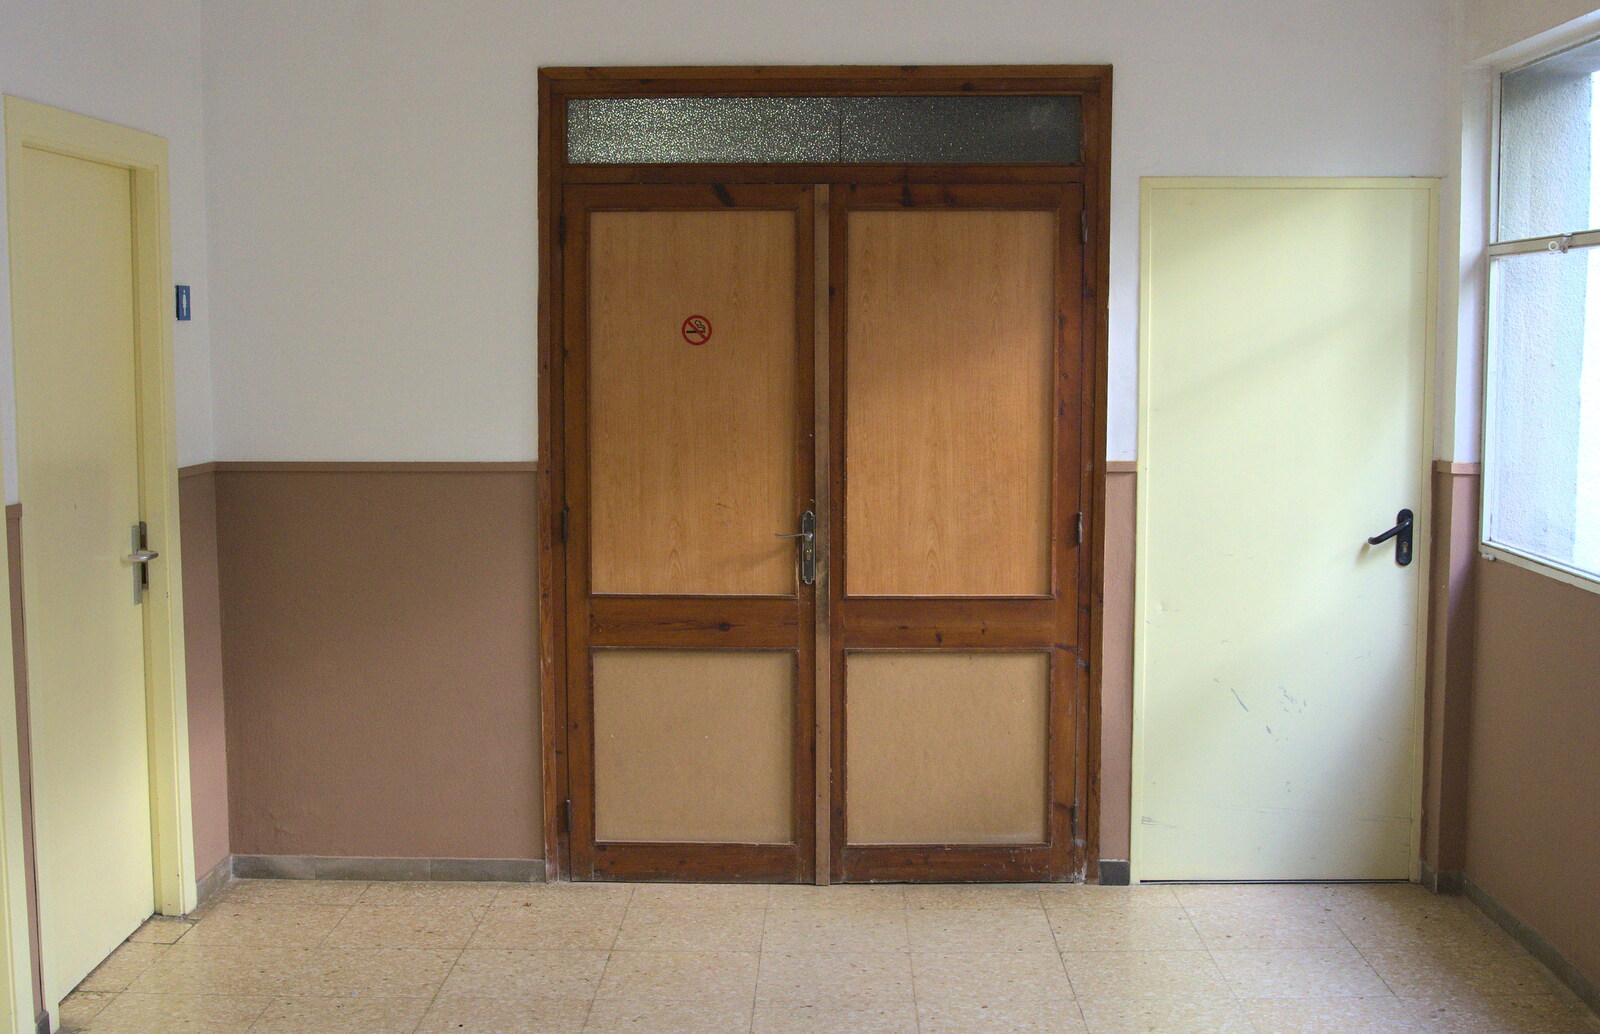 Mundane wooden doors from The Open Education Challenge, Barcelona, Catalonia - 13th July 2014